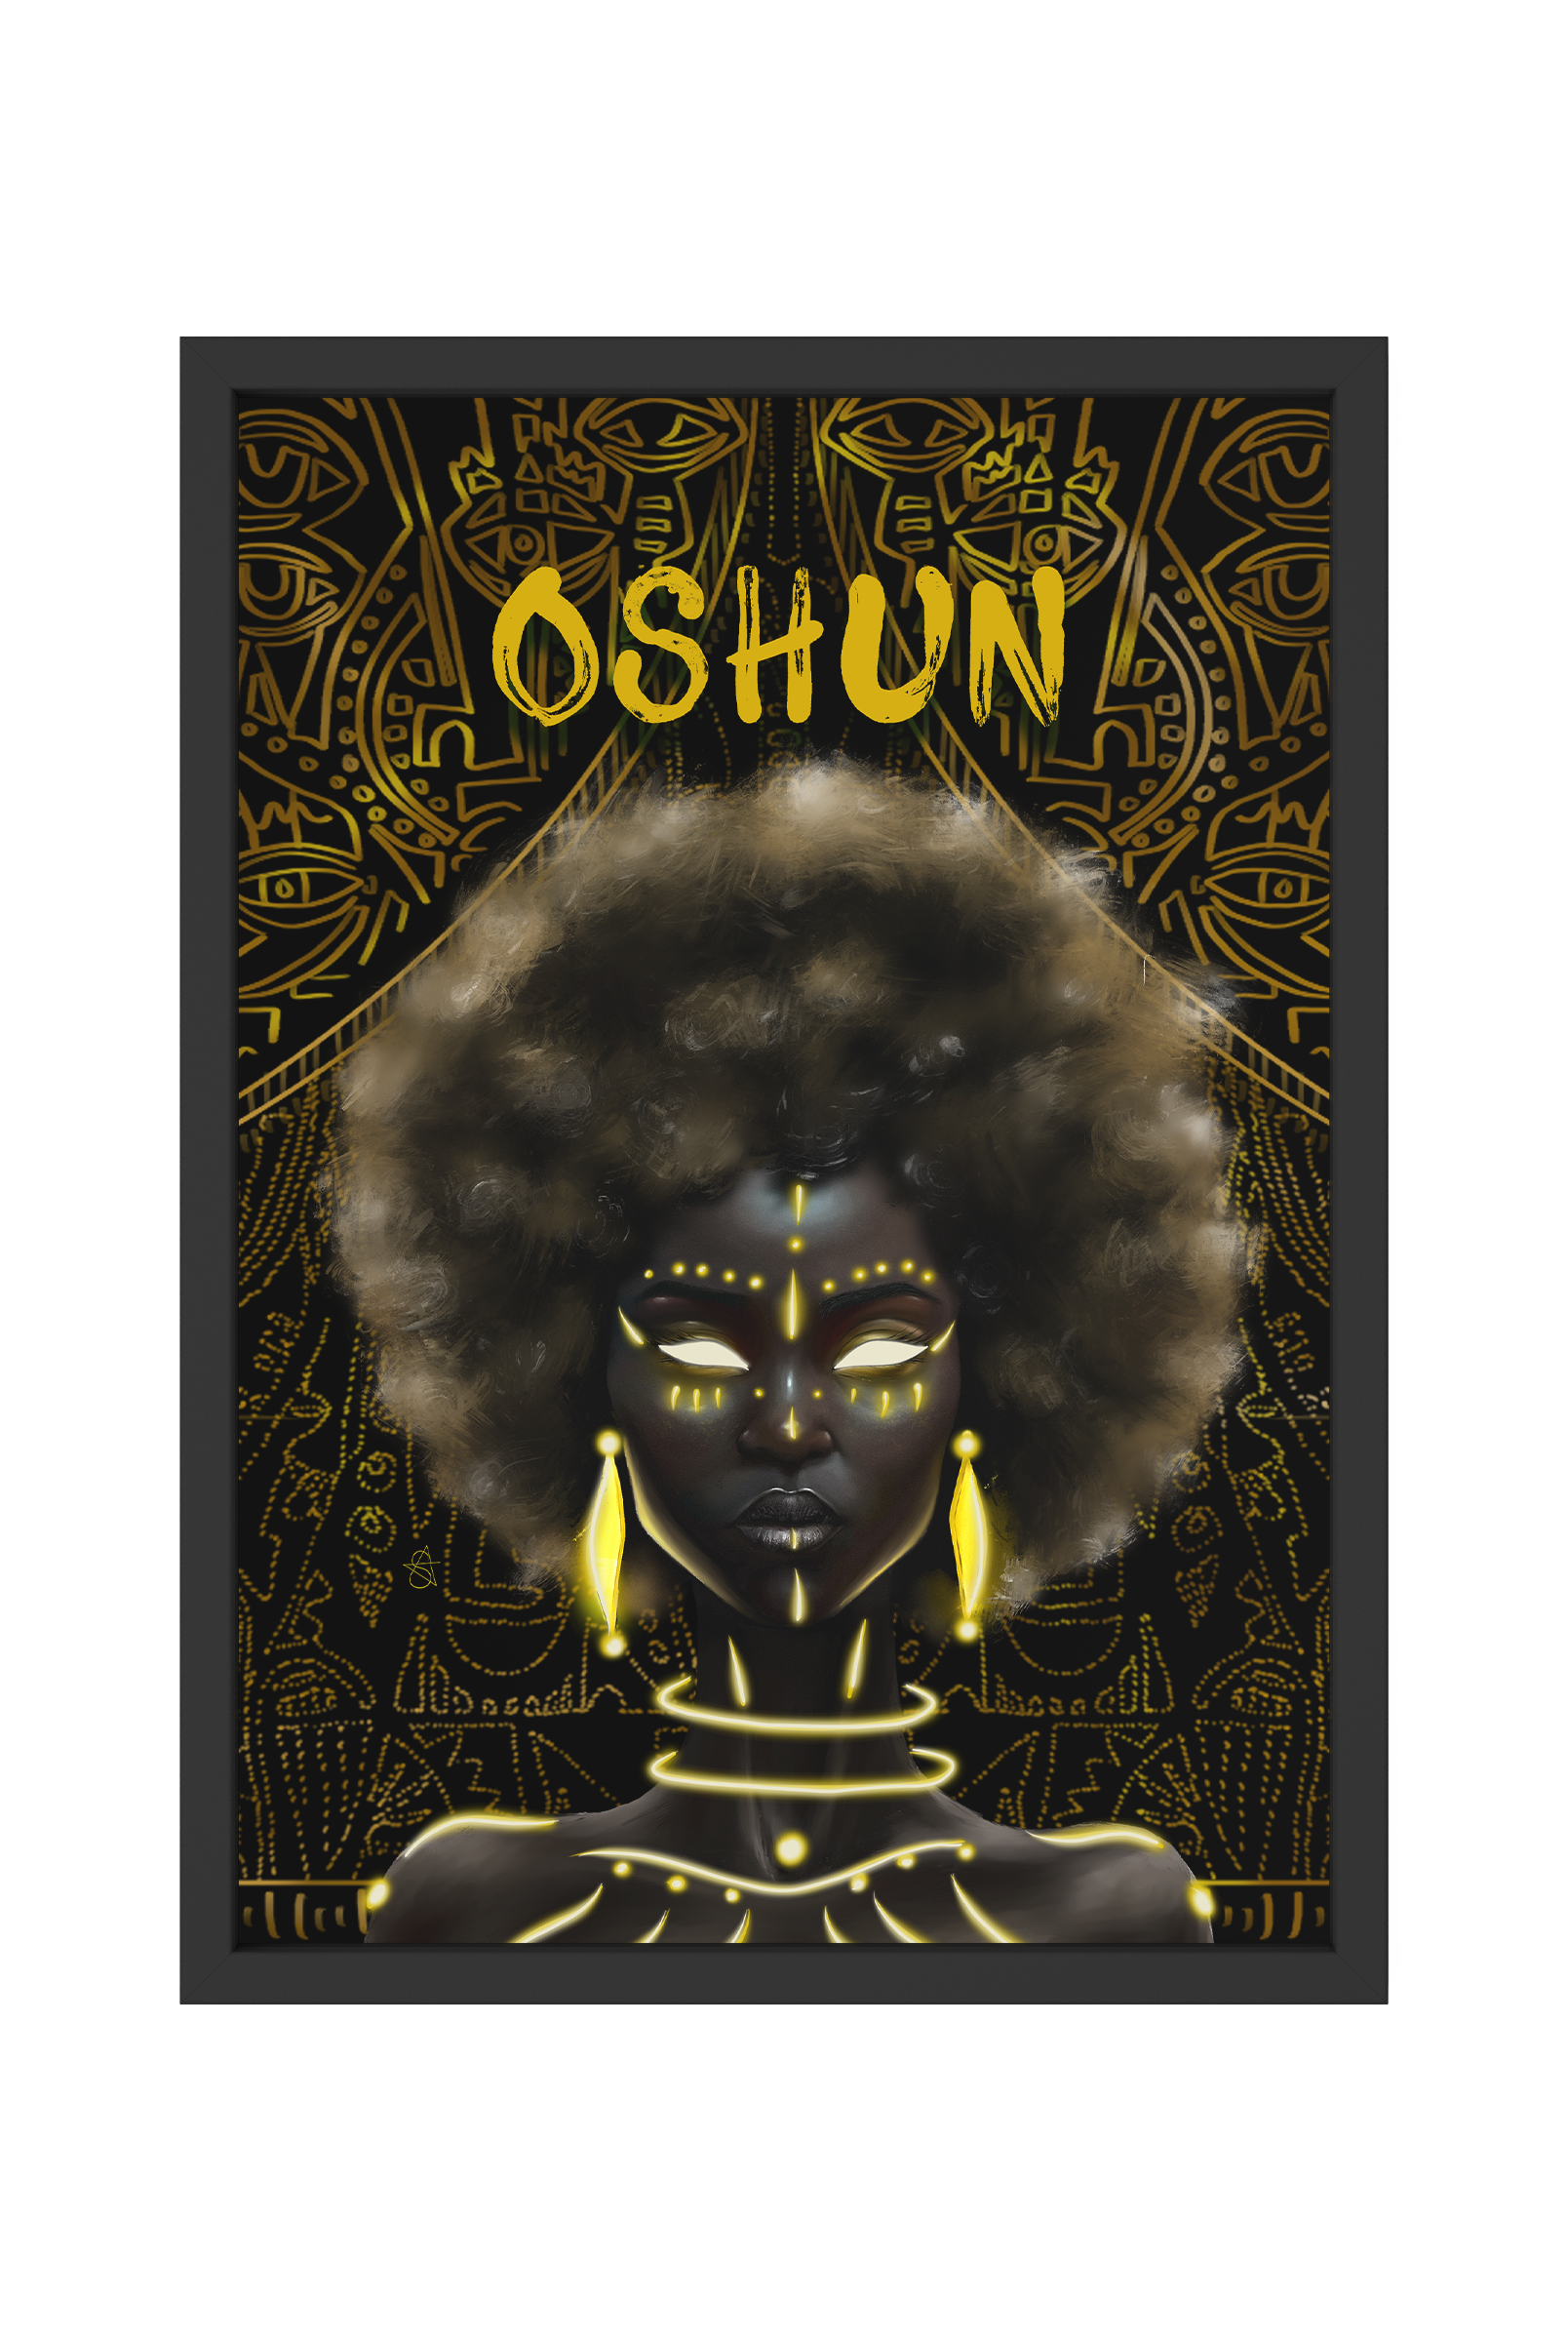 Oshun Holographic Art Print on high-quality matte or velvet paper, framed in gallery black, white, or natural maple, depicting Yoruba Orisa of sweet waters and femininity.